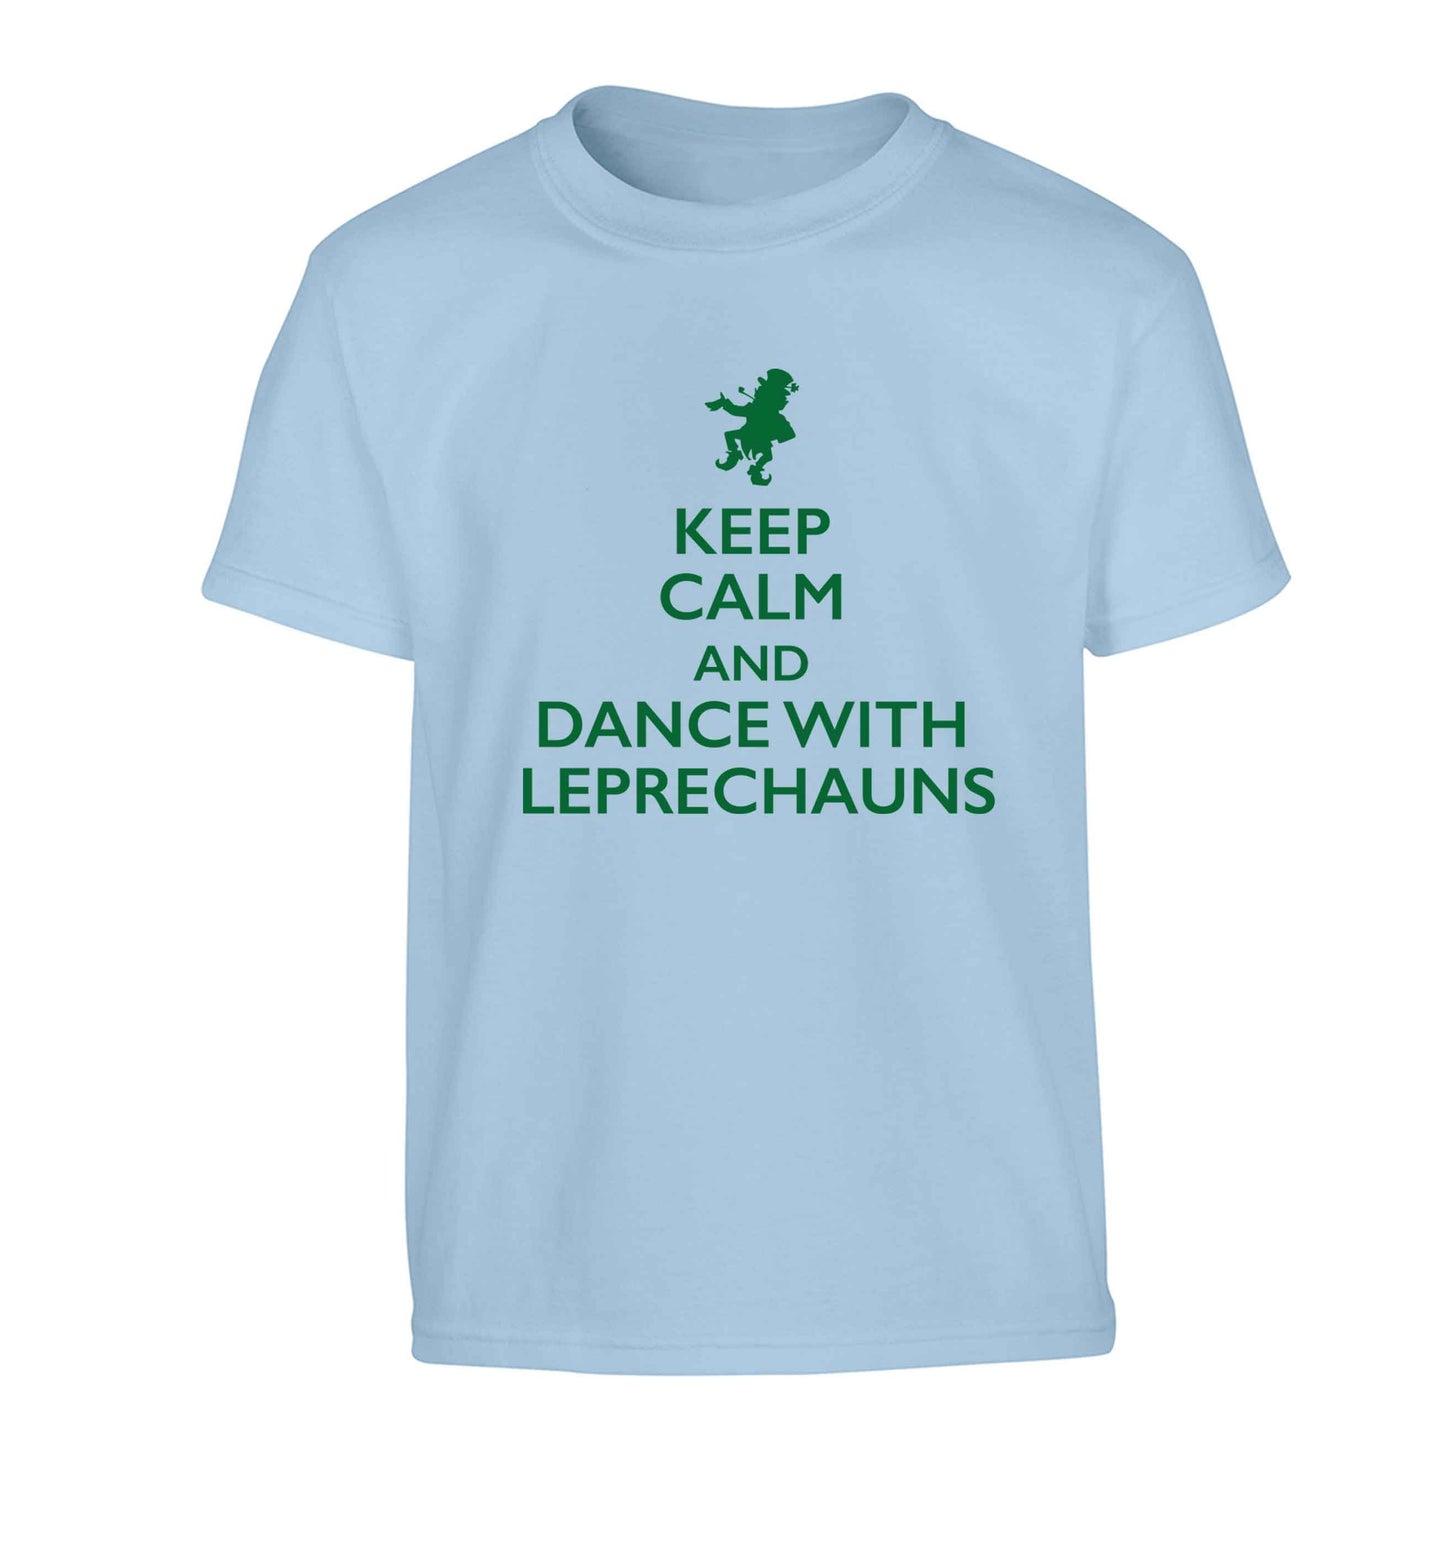 Keep calm and dance with leprechauns Children's light blue Tshirt 12-13 Years